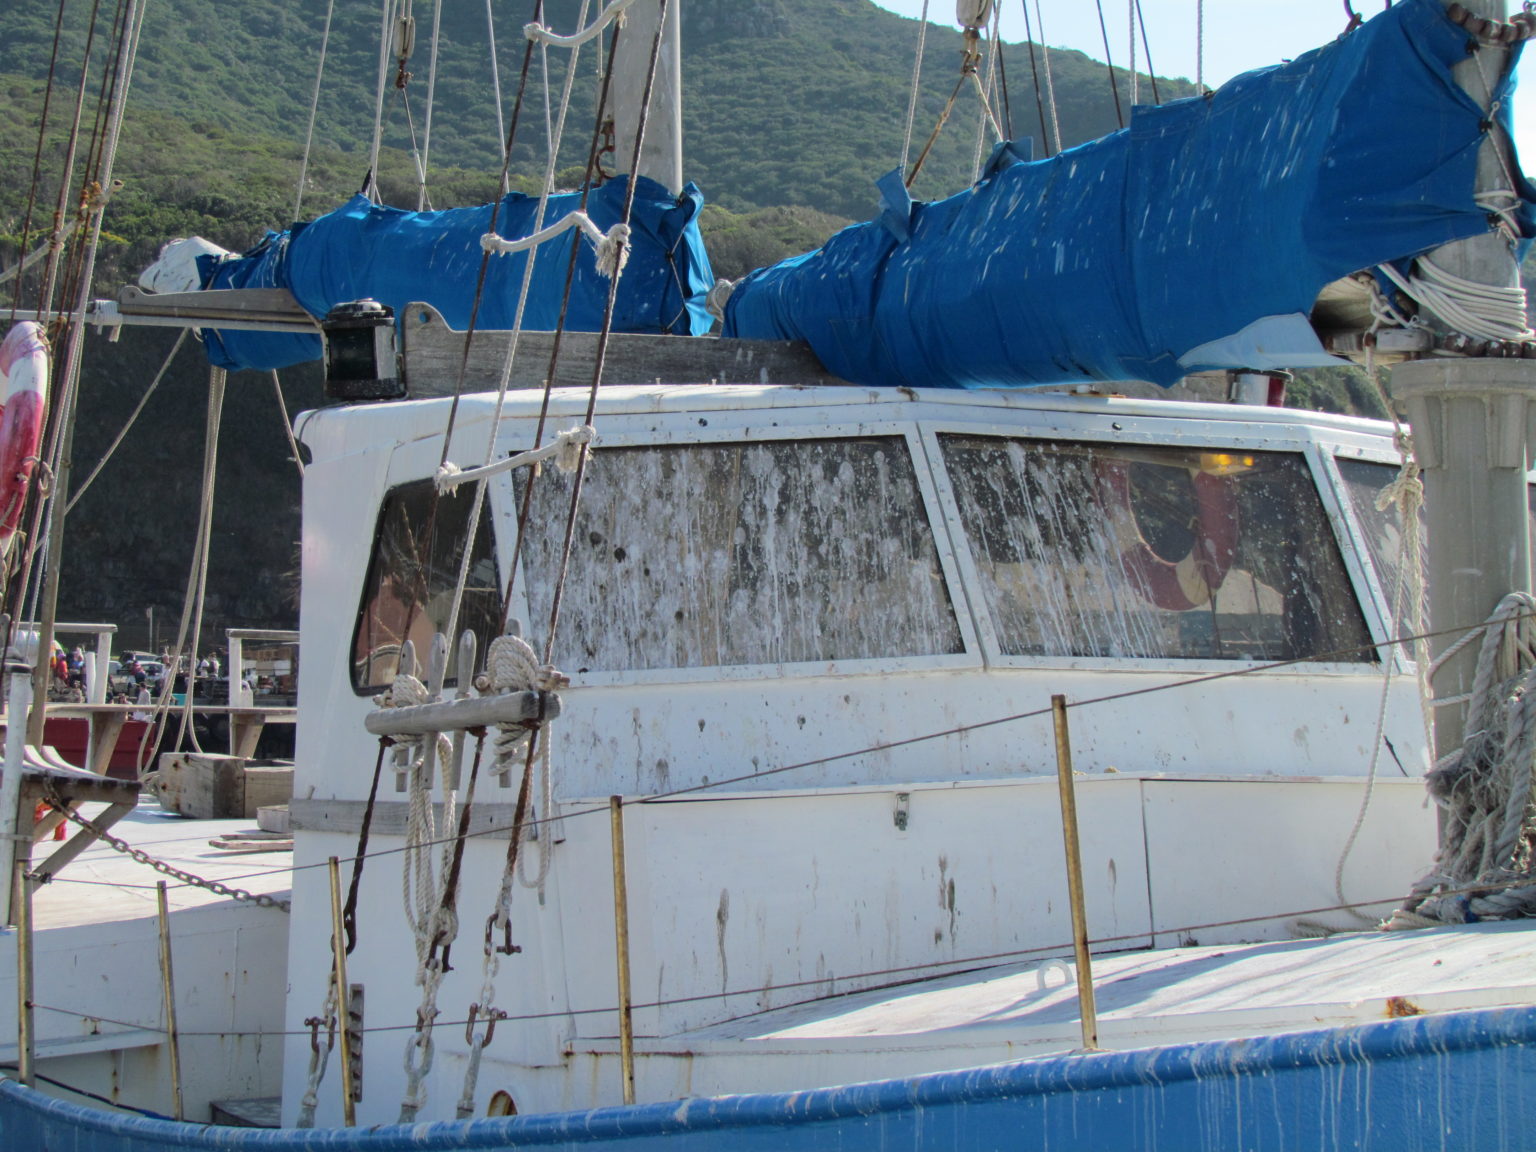 Boat covered in droppings